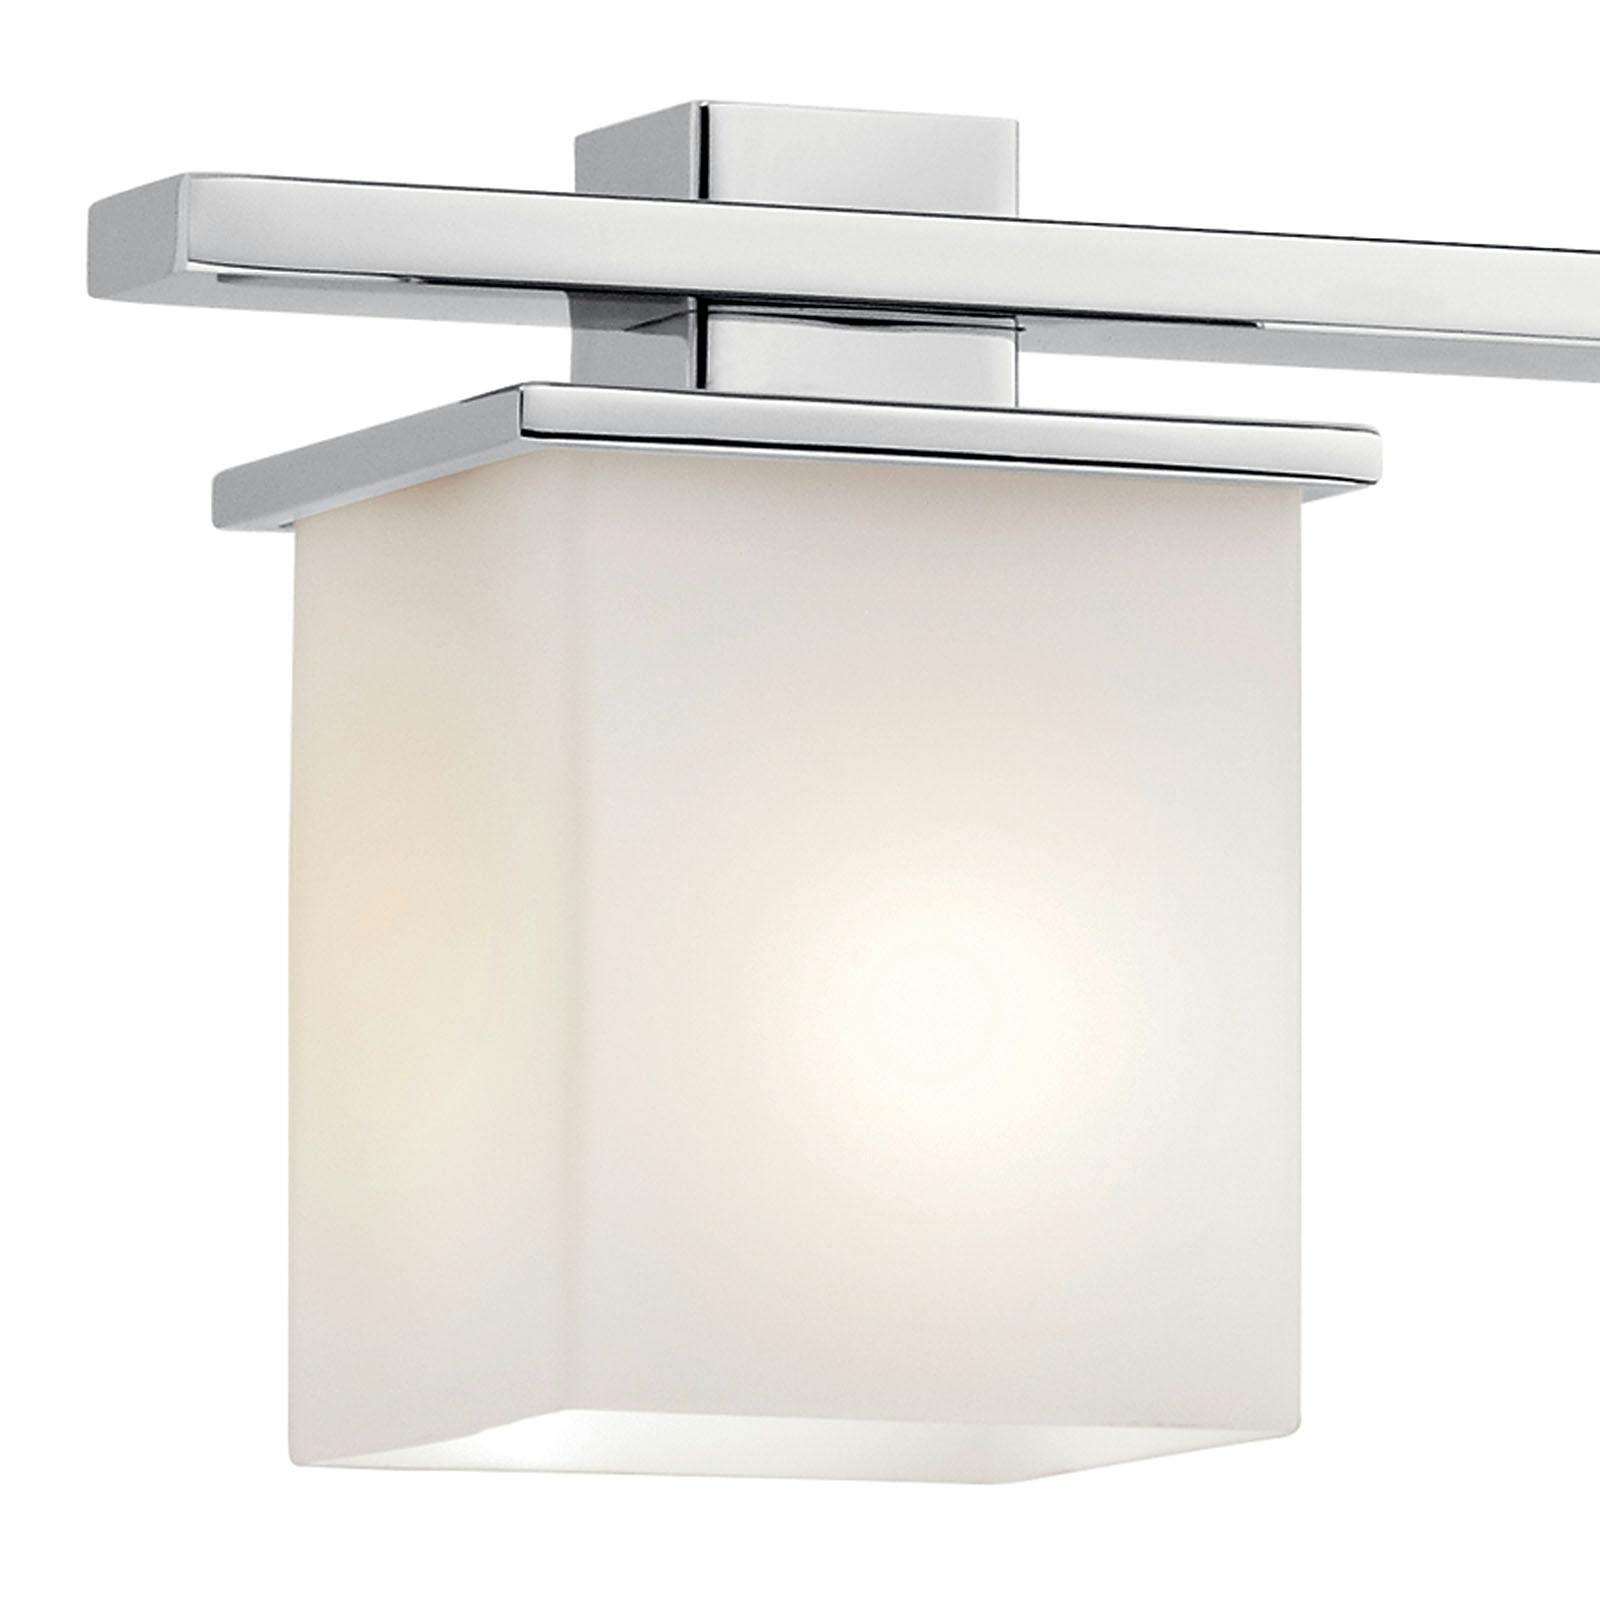 Close up view of the Tully 32" 4 Light Vanity Light Chrome on a white background